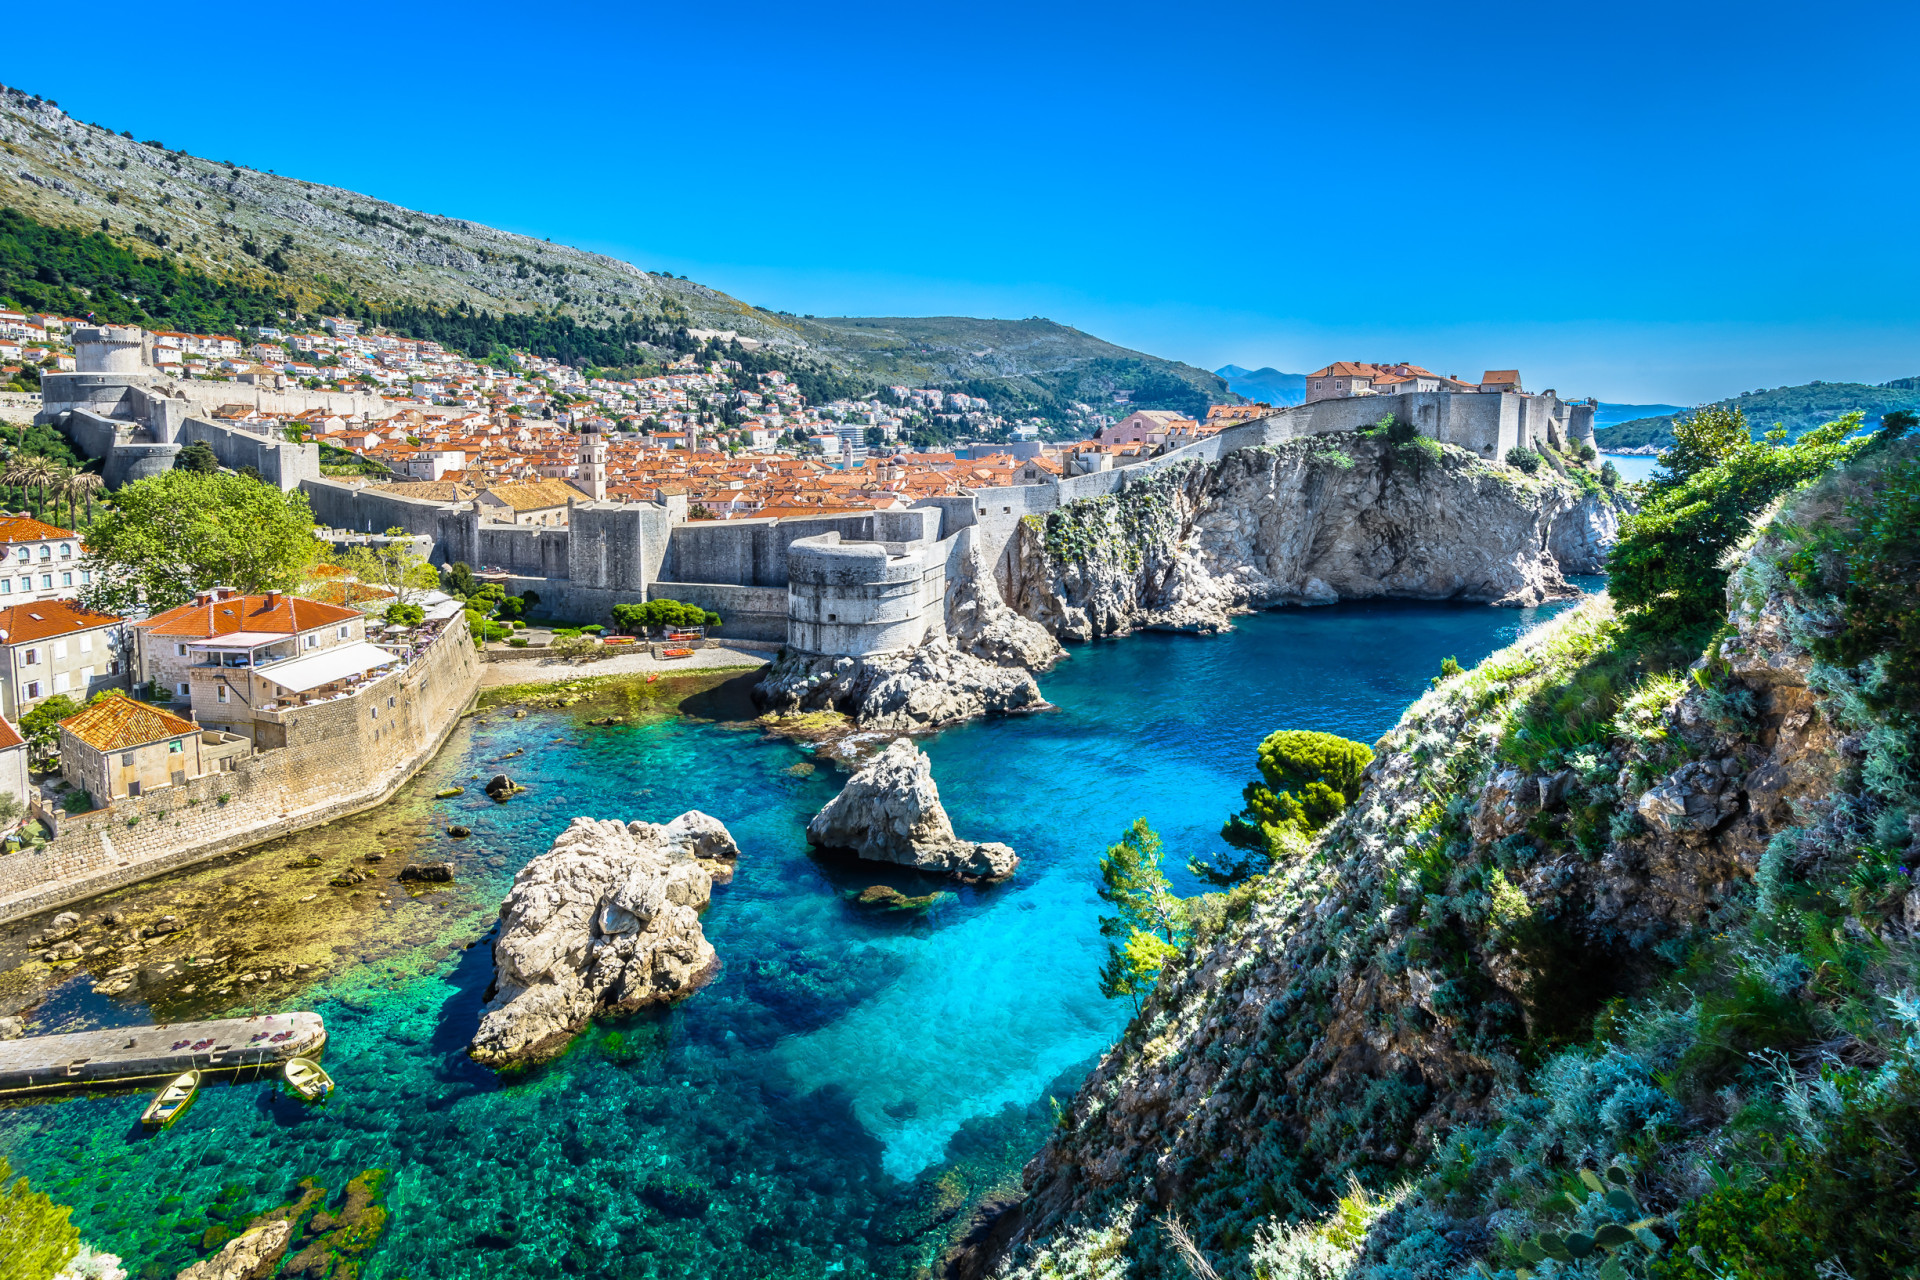 <p>The Croatian tourist tax depends on the season and location, but it's only around €1.33 (US$1.45) per night.</p><p><a href="https://www.msn.com/en-my/community/channel/vid-7xx8mnucu55yw63we9va2gwr7uihbxwc68fxqp25x6tg4ftibpra?cvid=94631541bc0f4f89bfd59158d696ad7e">Follow us and access great exclusive content every day</a></p>